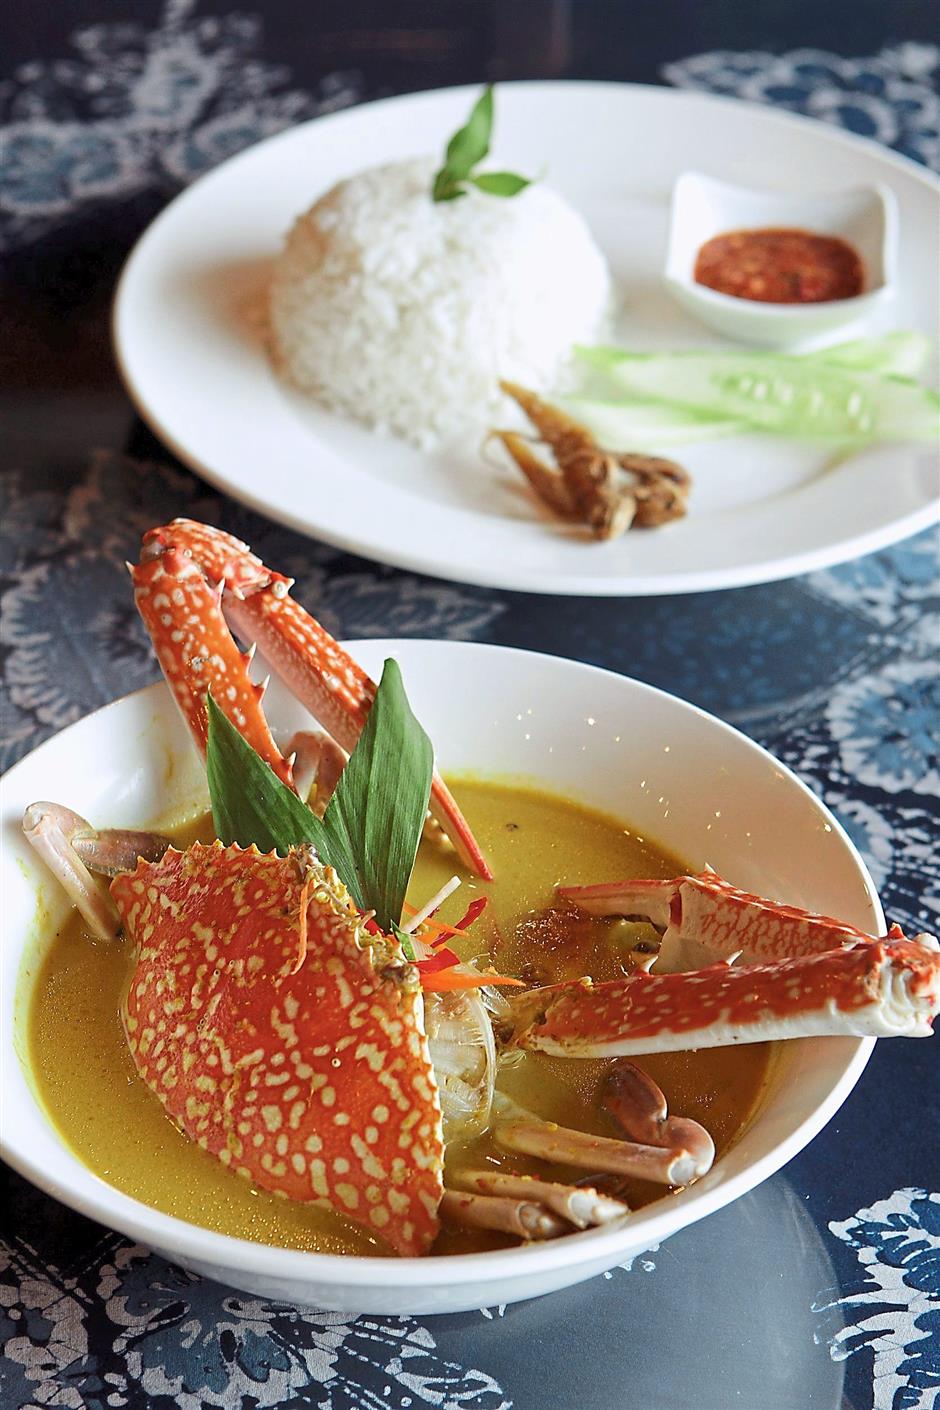 This dish might look tame but sure packs a punch with cili padi heat and soft, sweet crab meat.